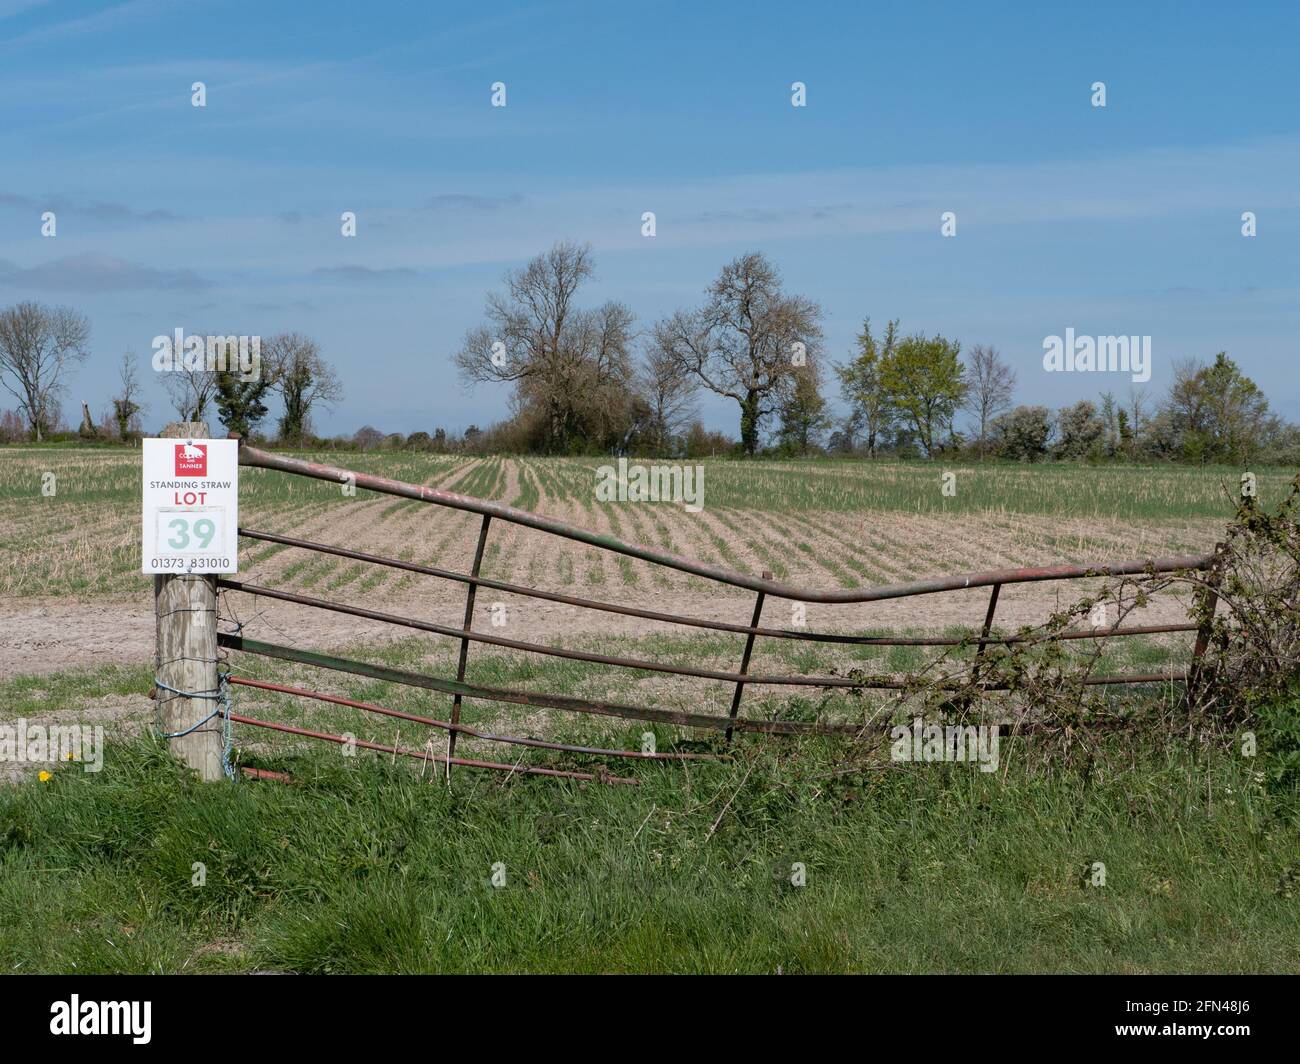 An arable field up for auction with details of the auctioneer displayed on a damaged metal gate in Upton Scudamore, Wiltshire, England, UK. Stock Photo